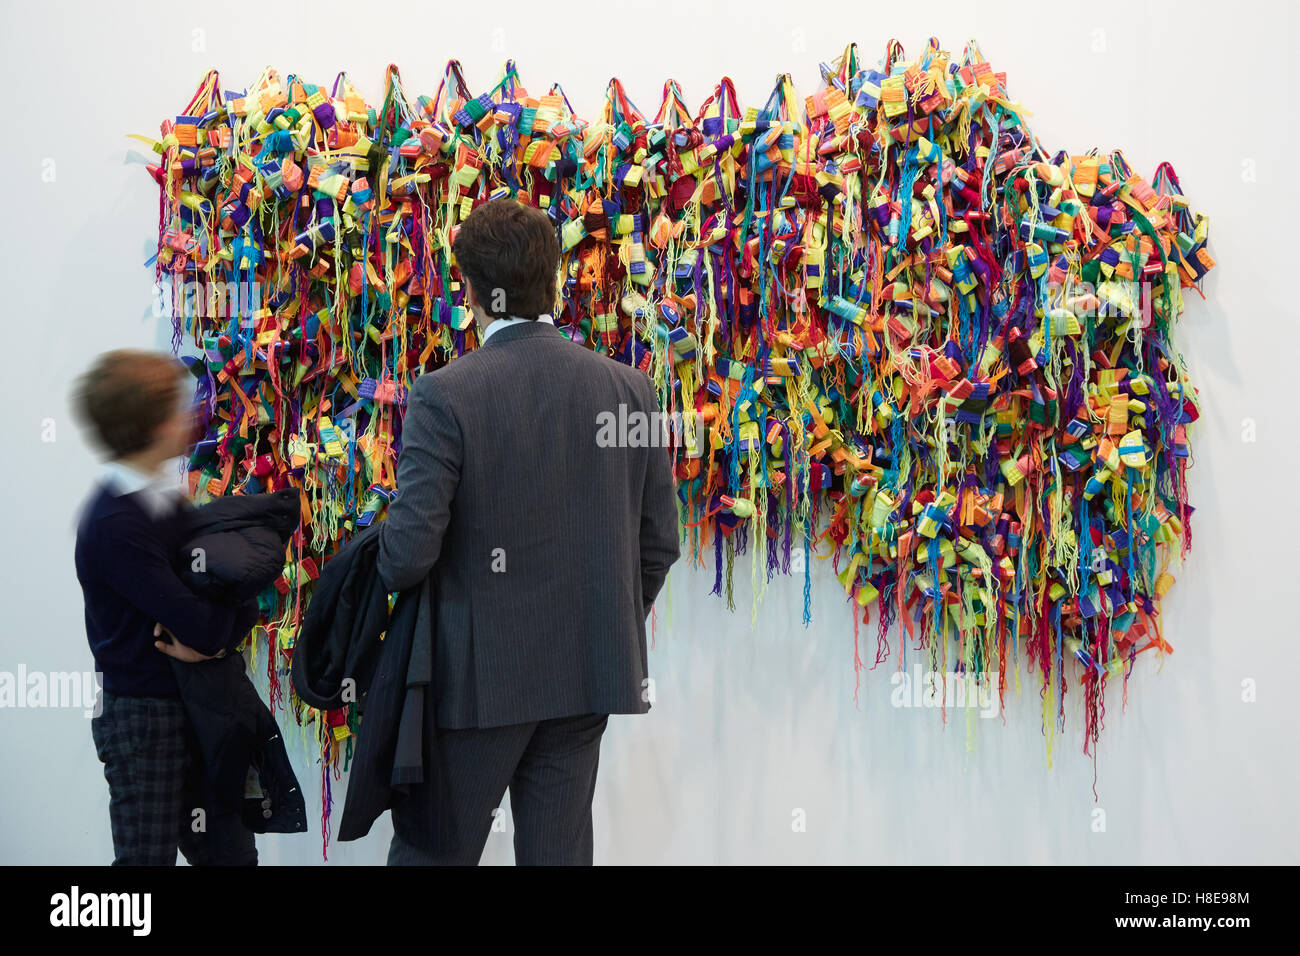 Man and boy near colorful sculpture during Artissima, contemporary art fair opening in Turin Stock Photo